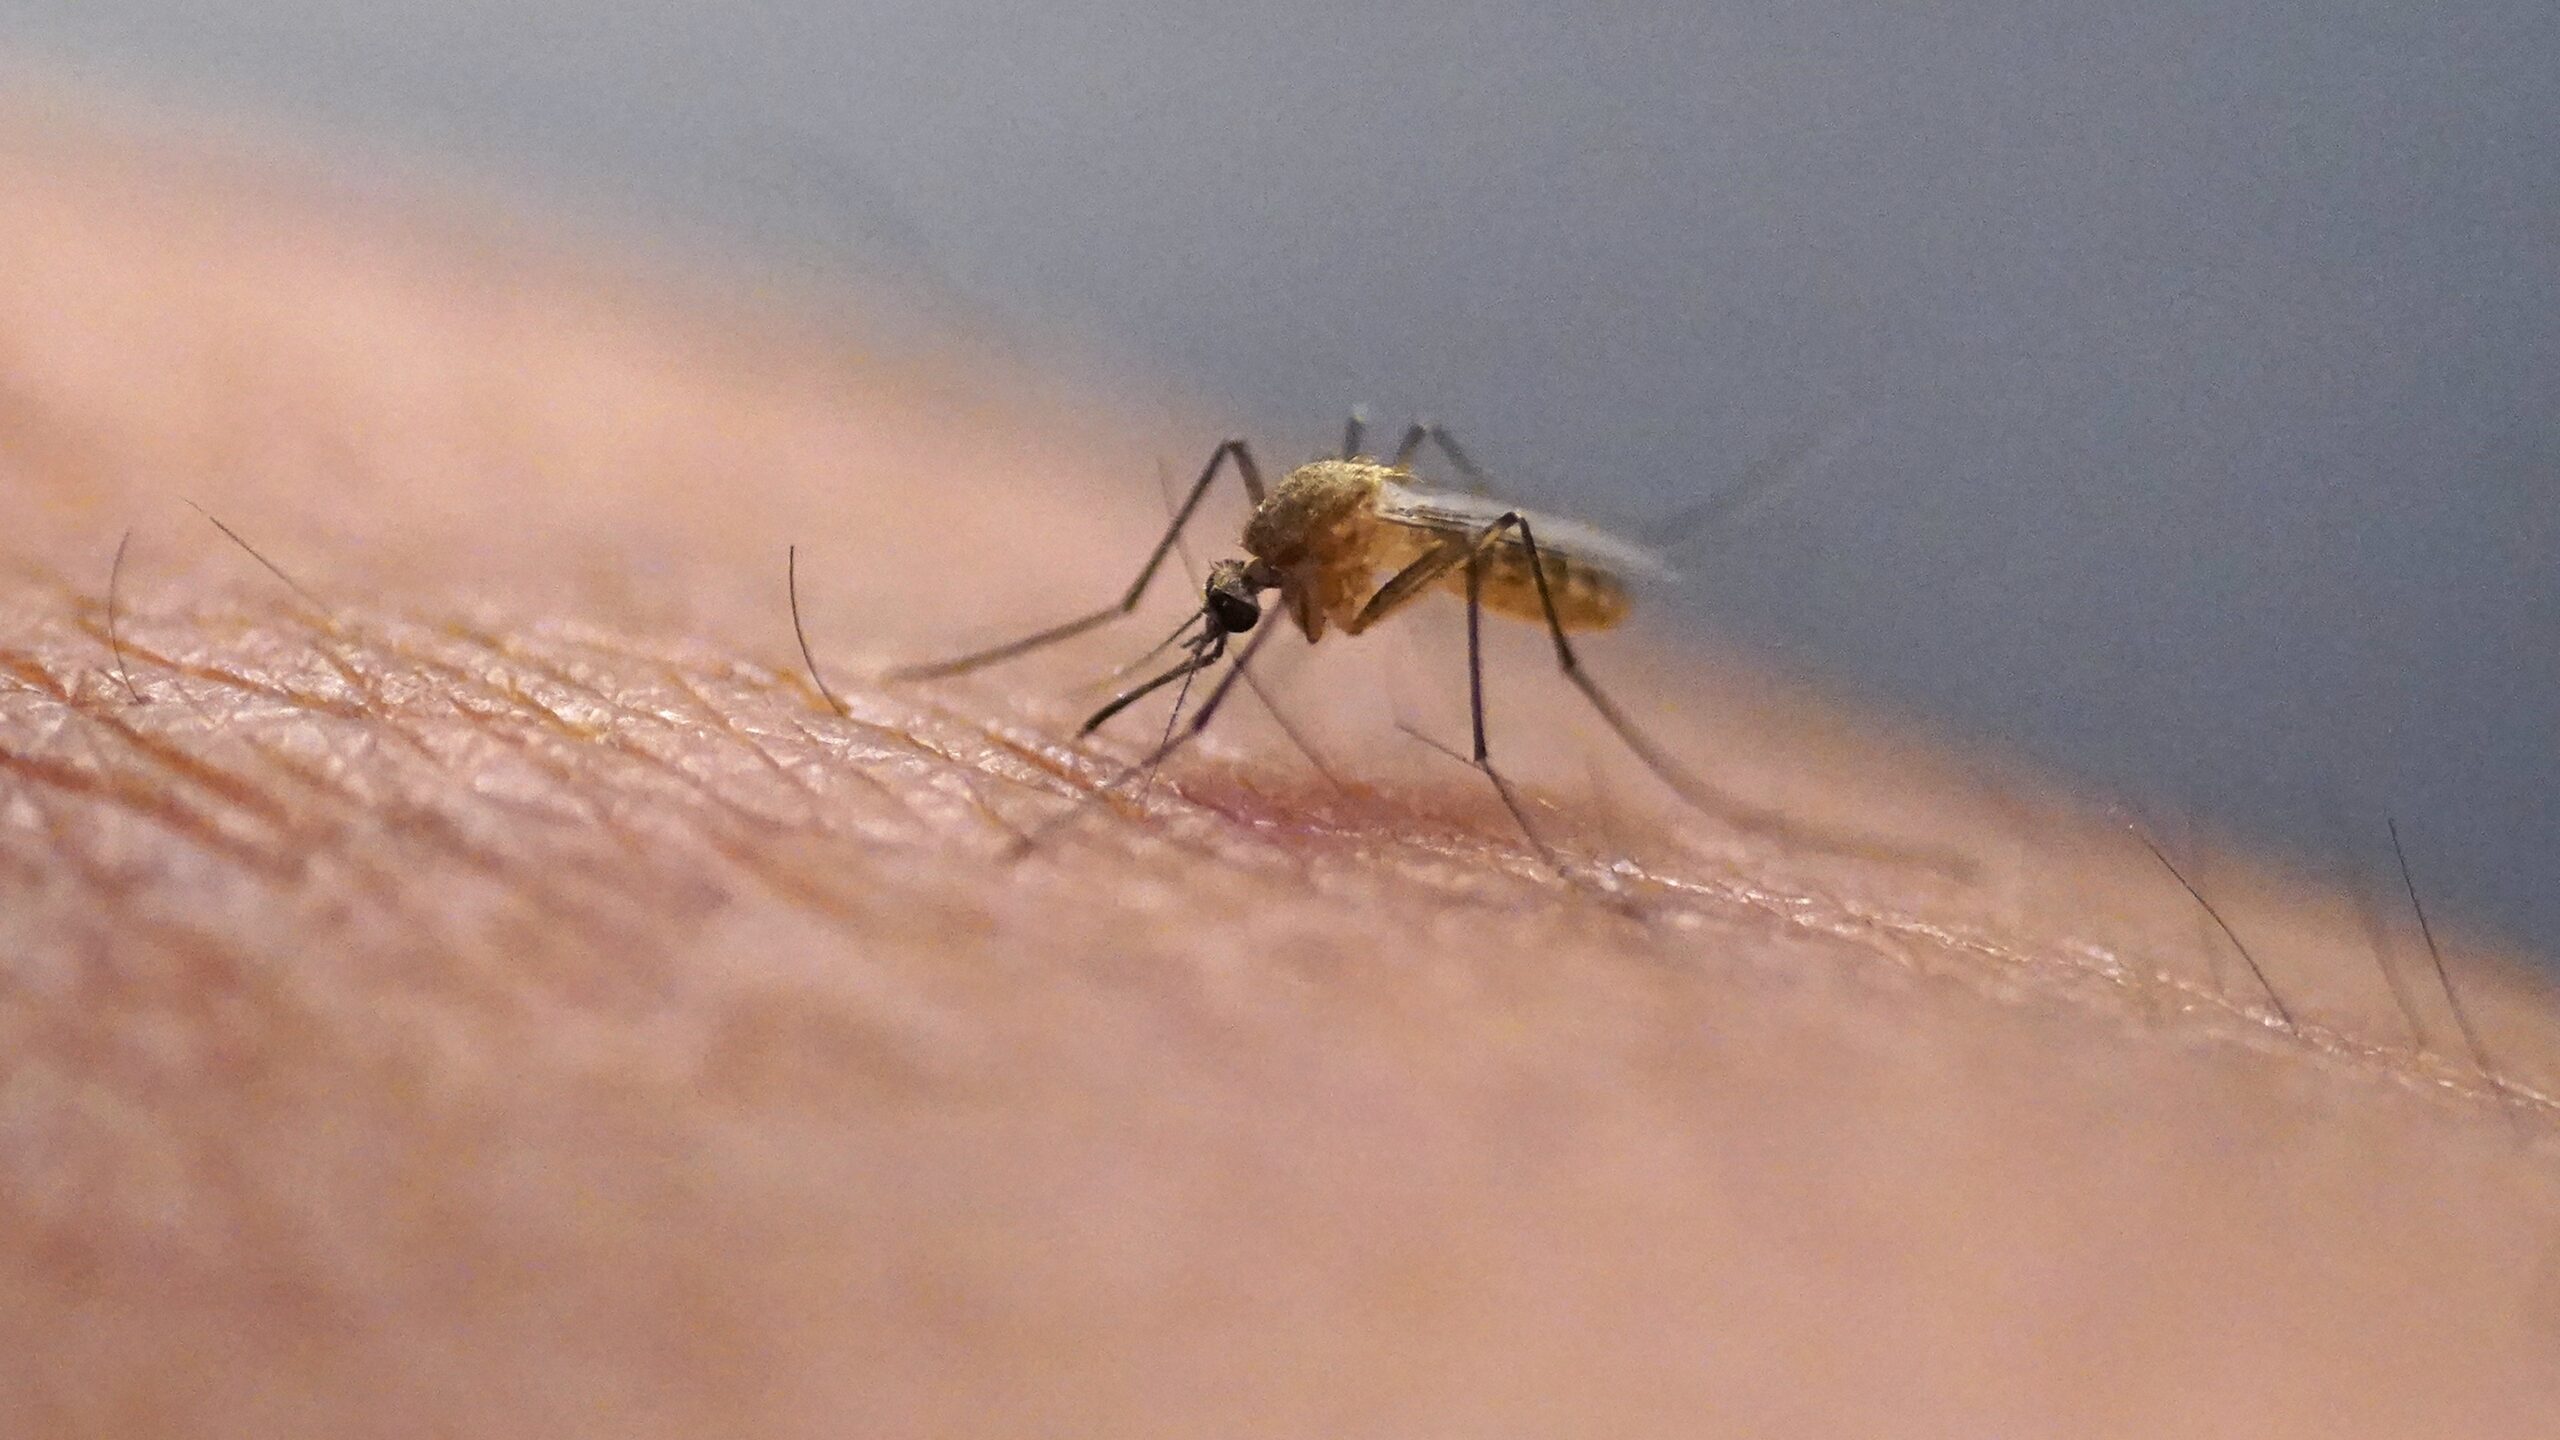 The U.S. is unprepared for the growing threat of mosquito- and tick-borne viruses